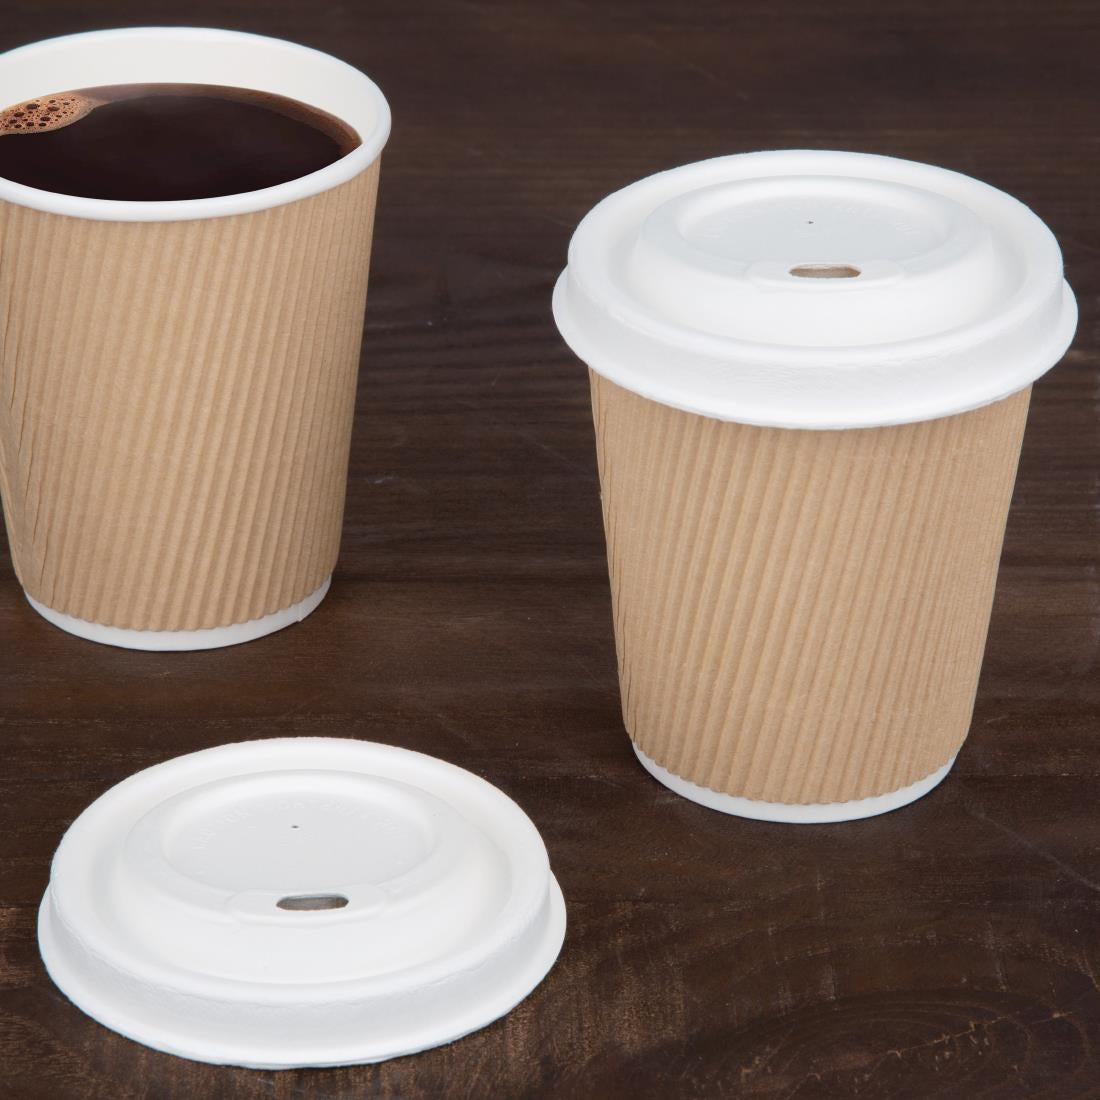 FS060 Fiesta Compostable Bagasse Coffee Cup Lids 225ml / 8oz (Pack of 1000) JD Catering Equipment Solutions Ltd